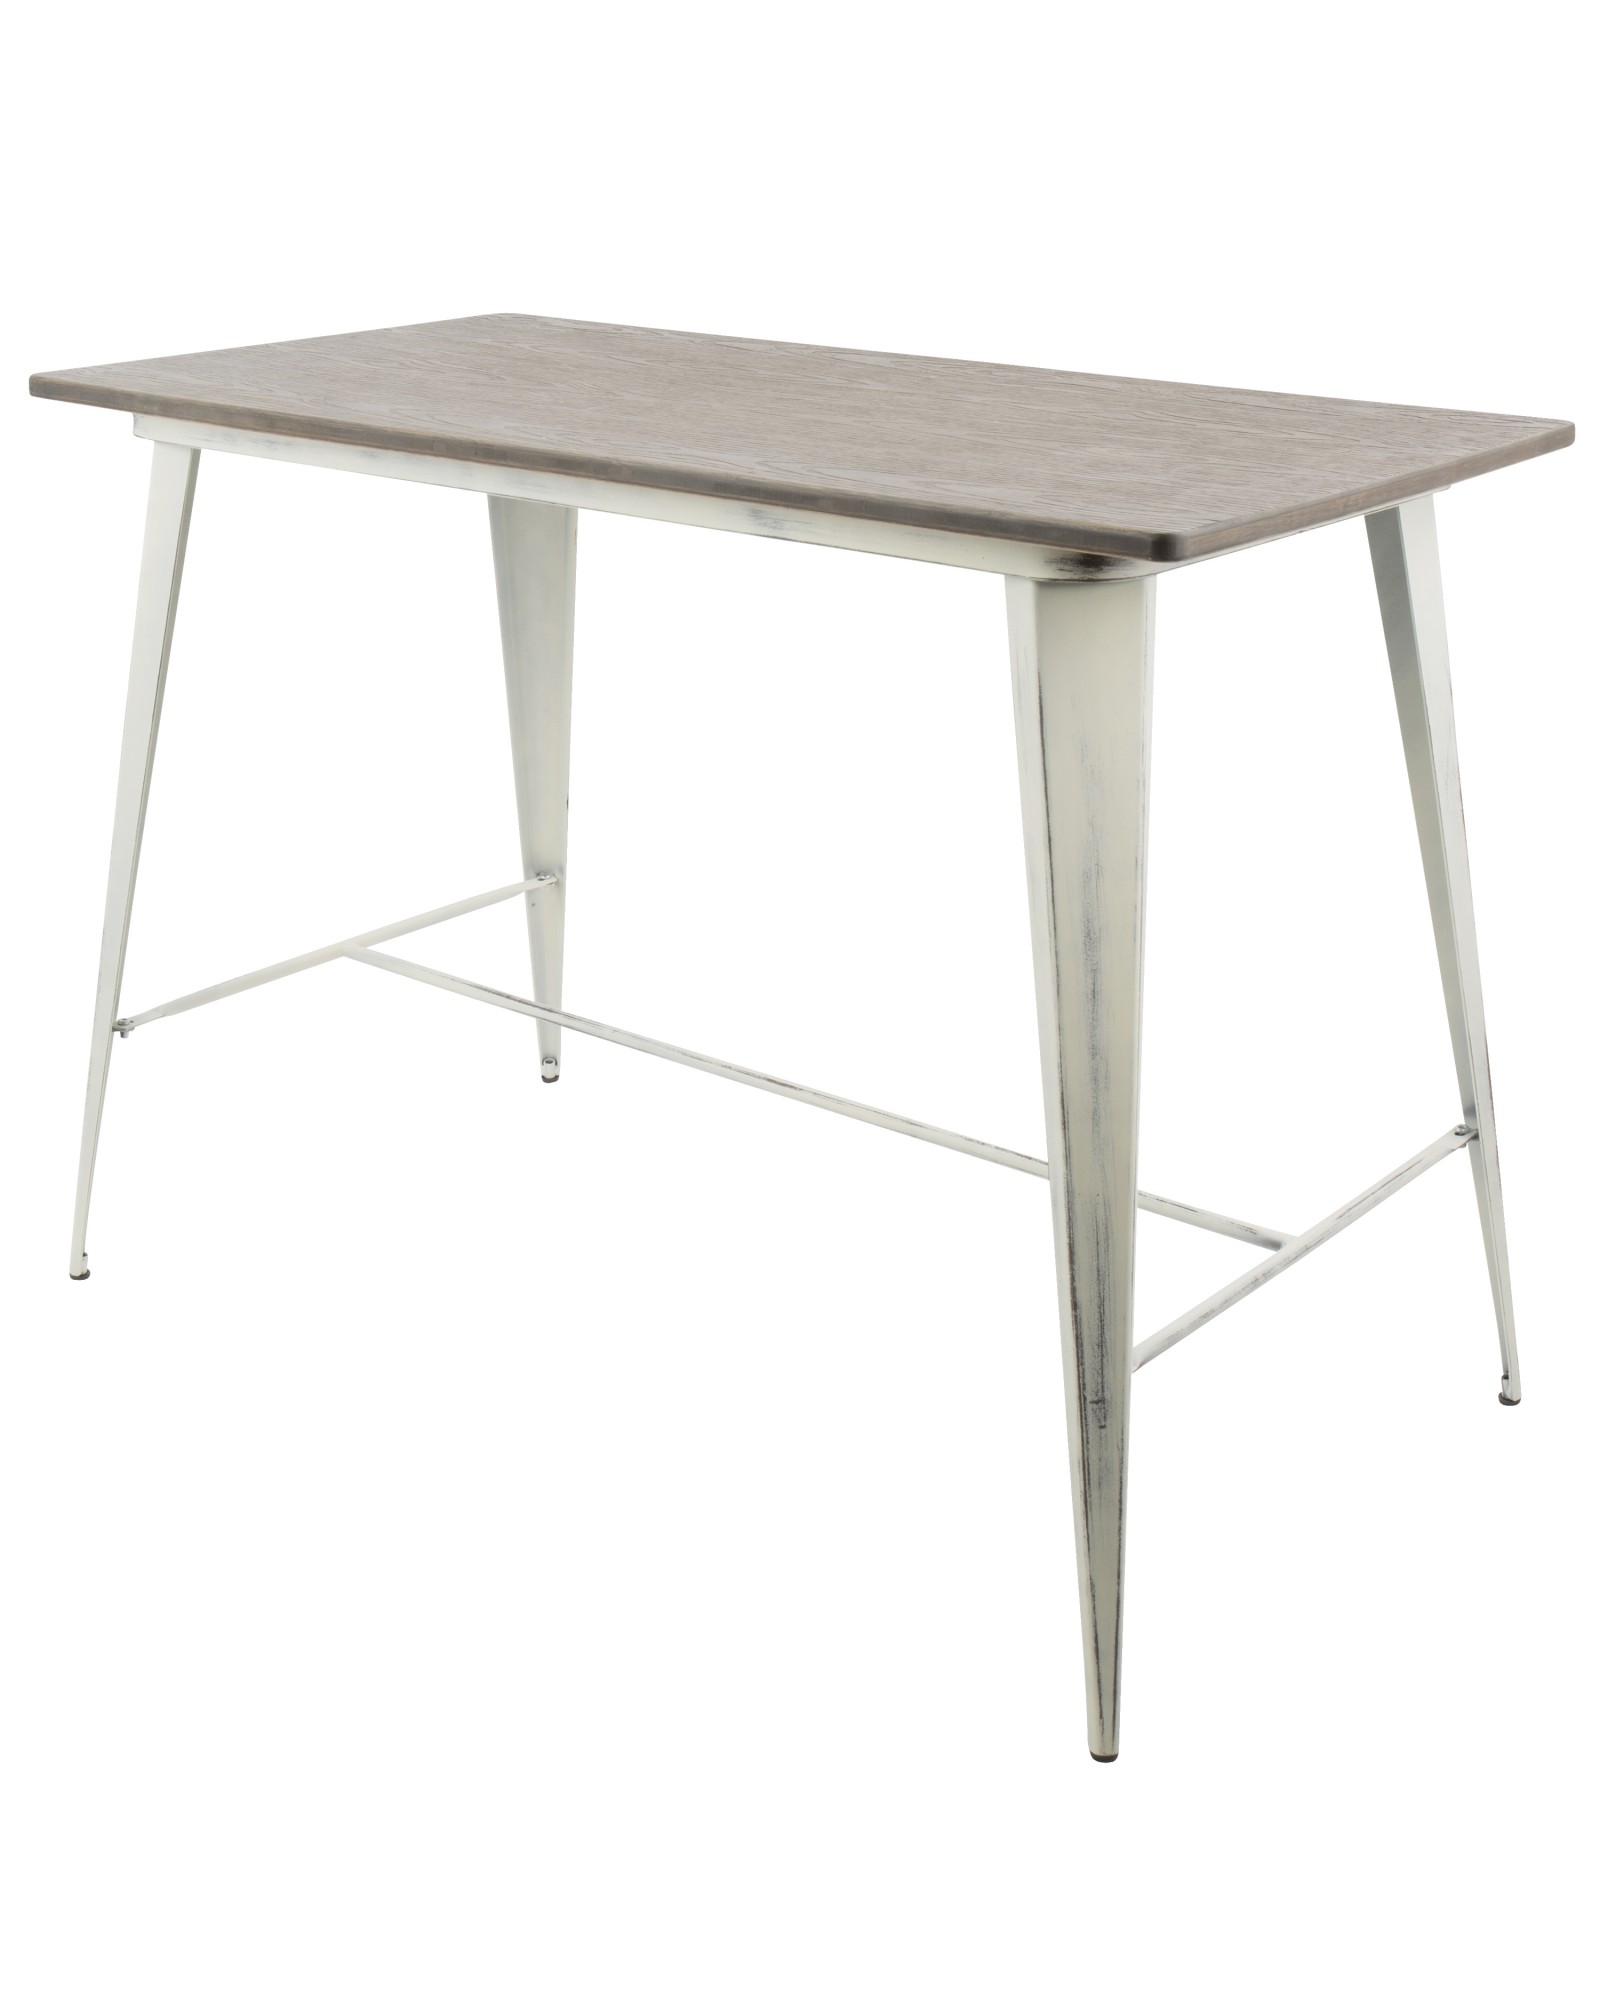 Oregon Industrial Counter Table in Vintage White and Espresso